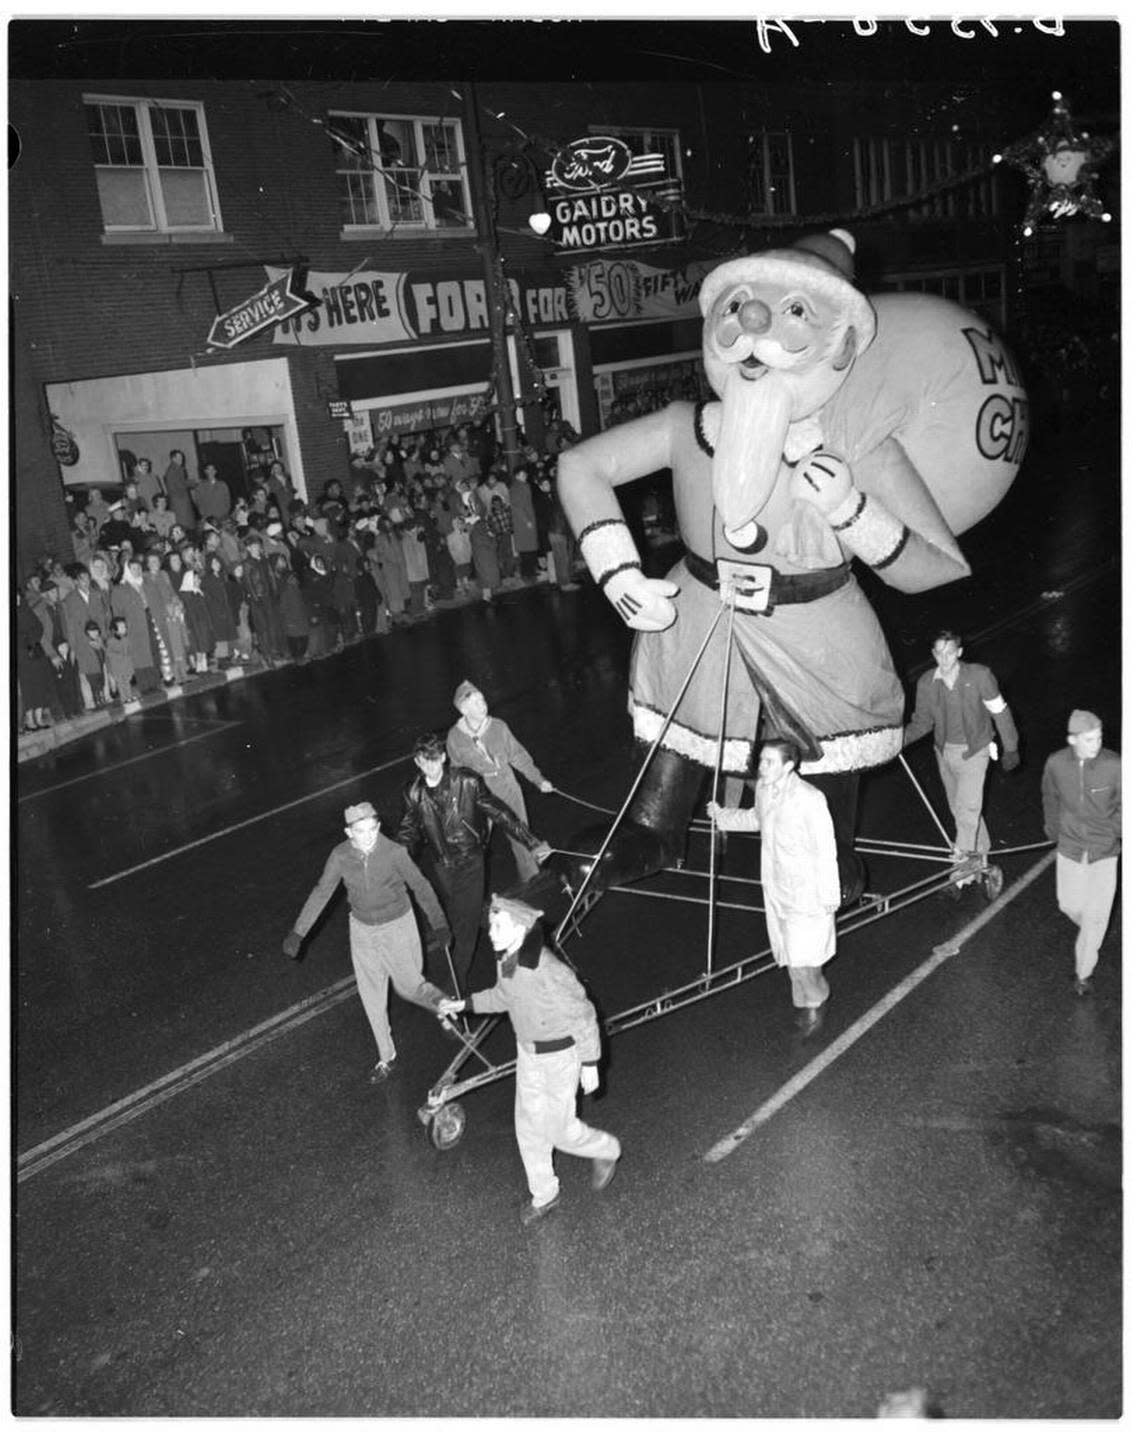 A giant Santa Claus float made its way down Lexington’s Main Street during the Christmas parade Dec. 1, 1949.